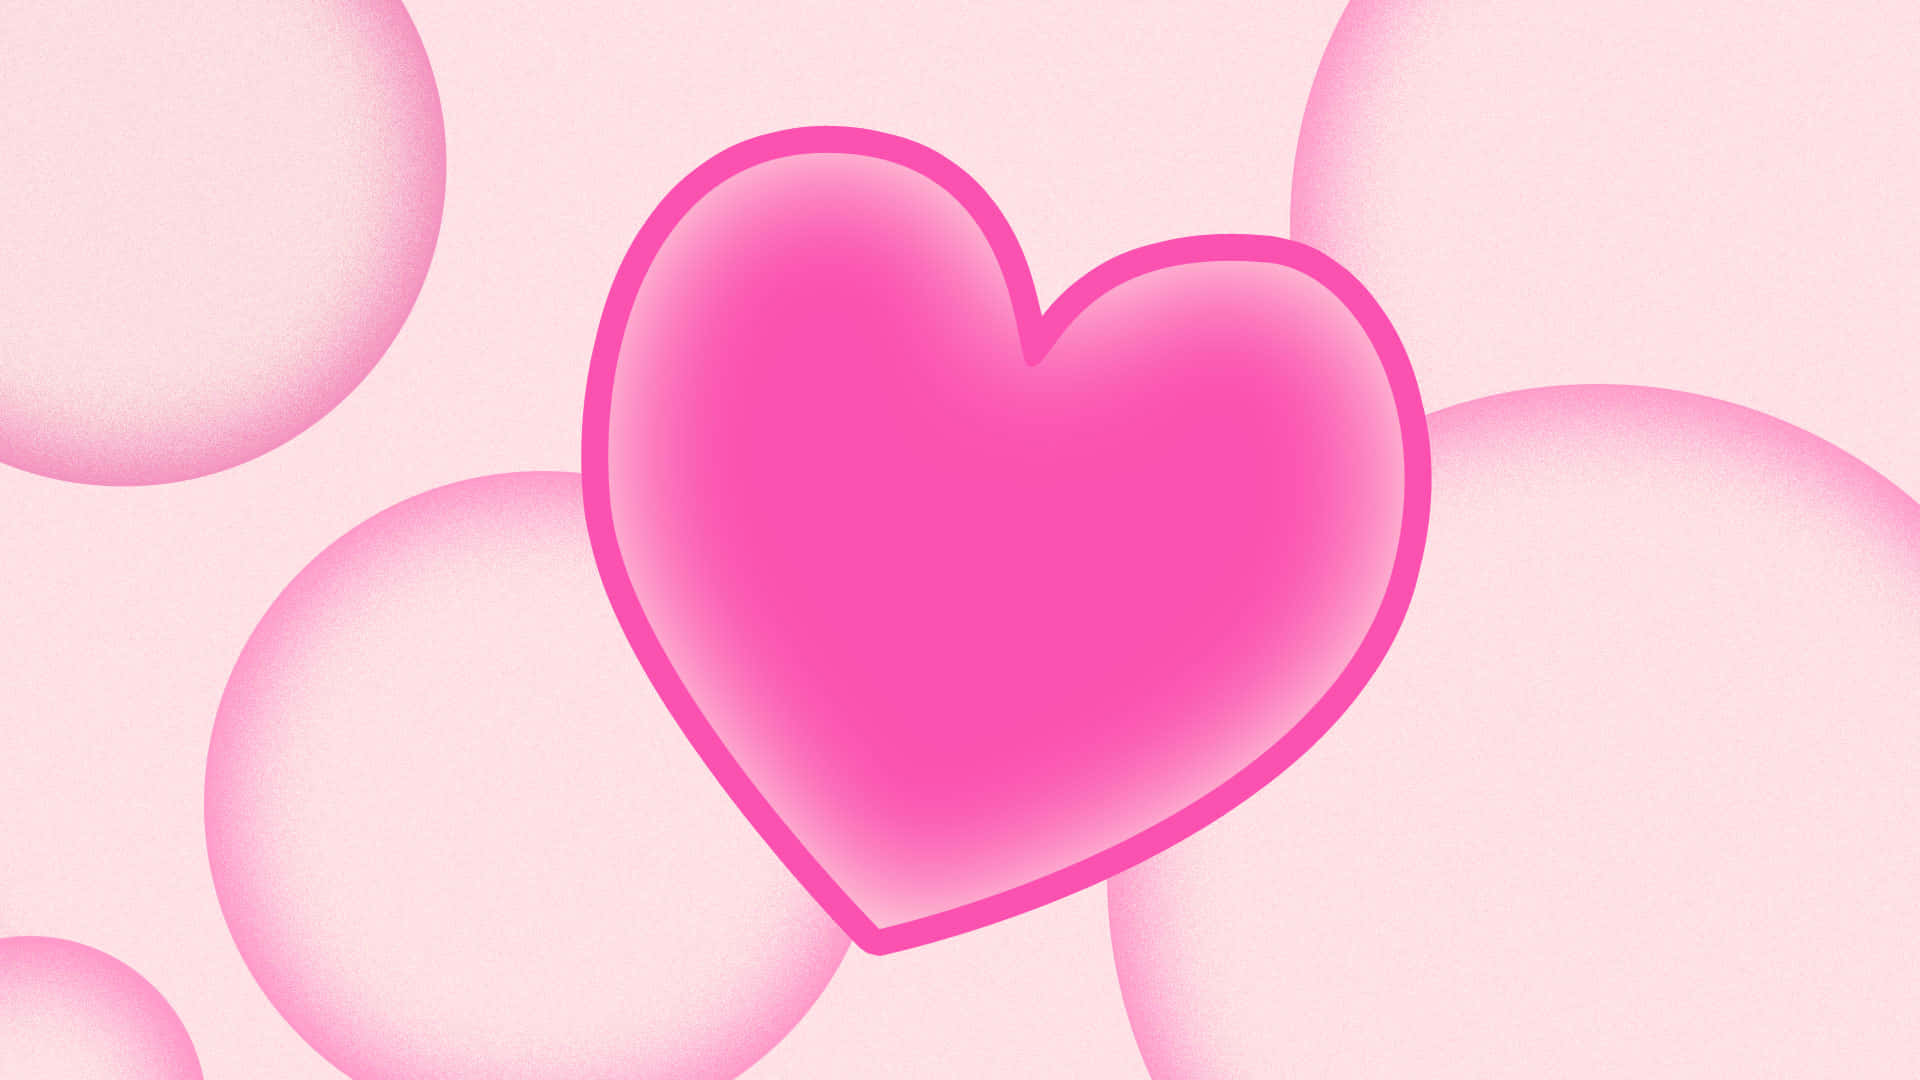 Embrace the Pink Love within your soul Wallpaper